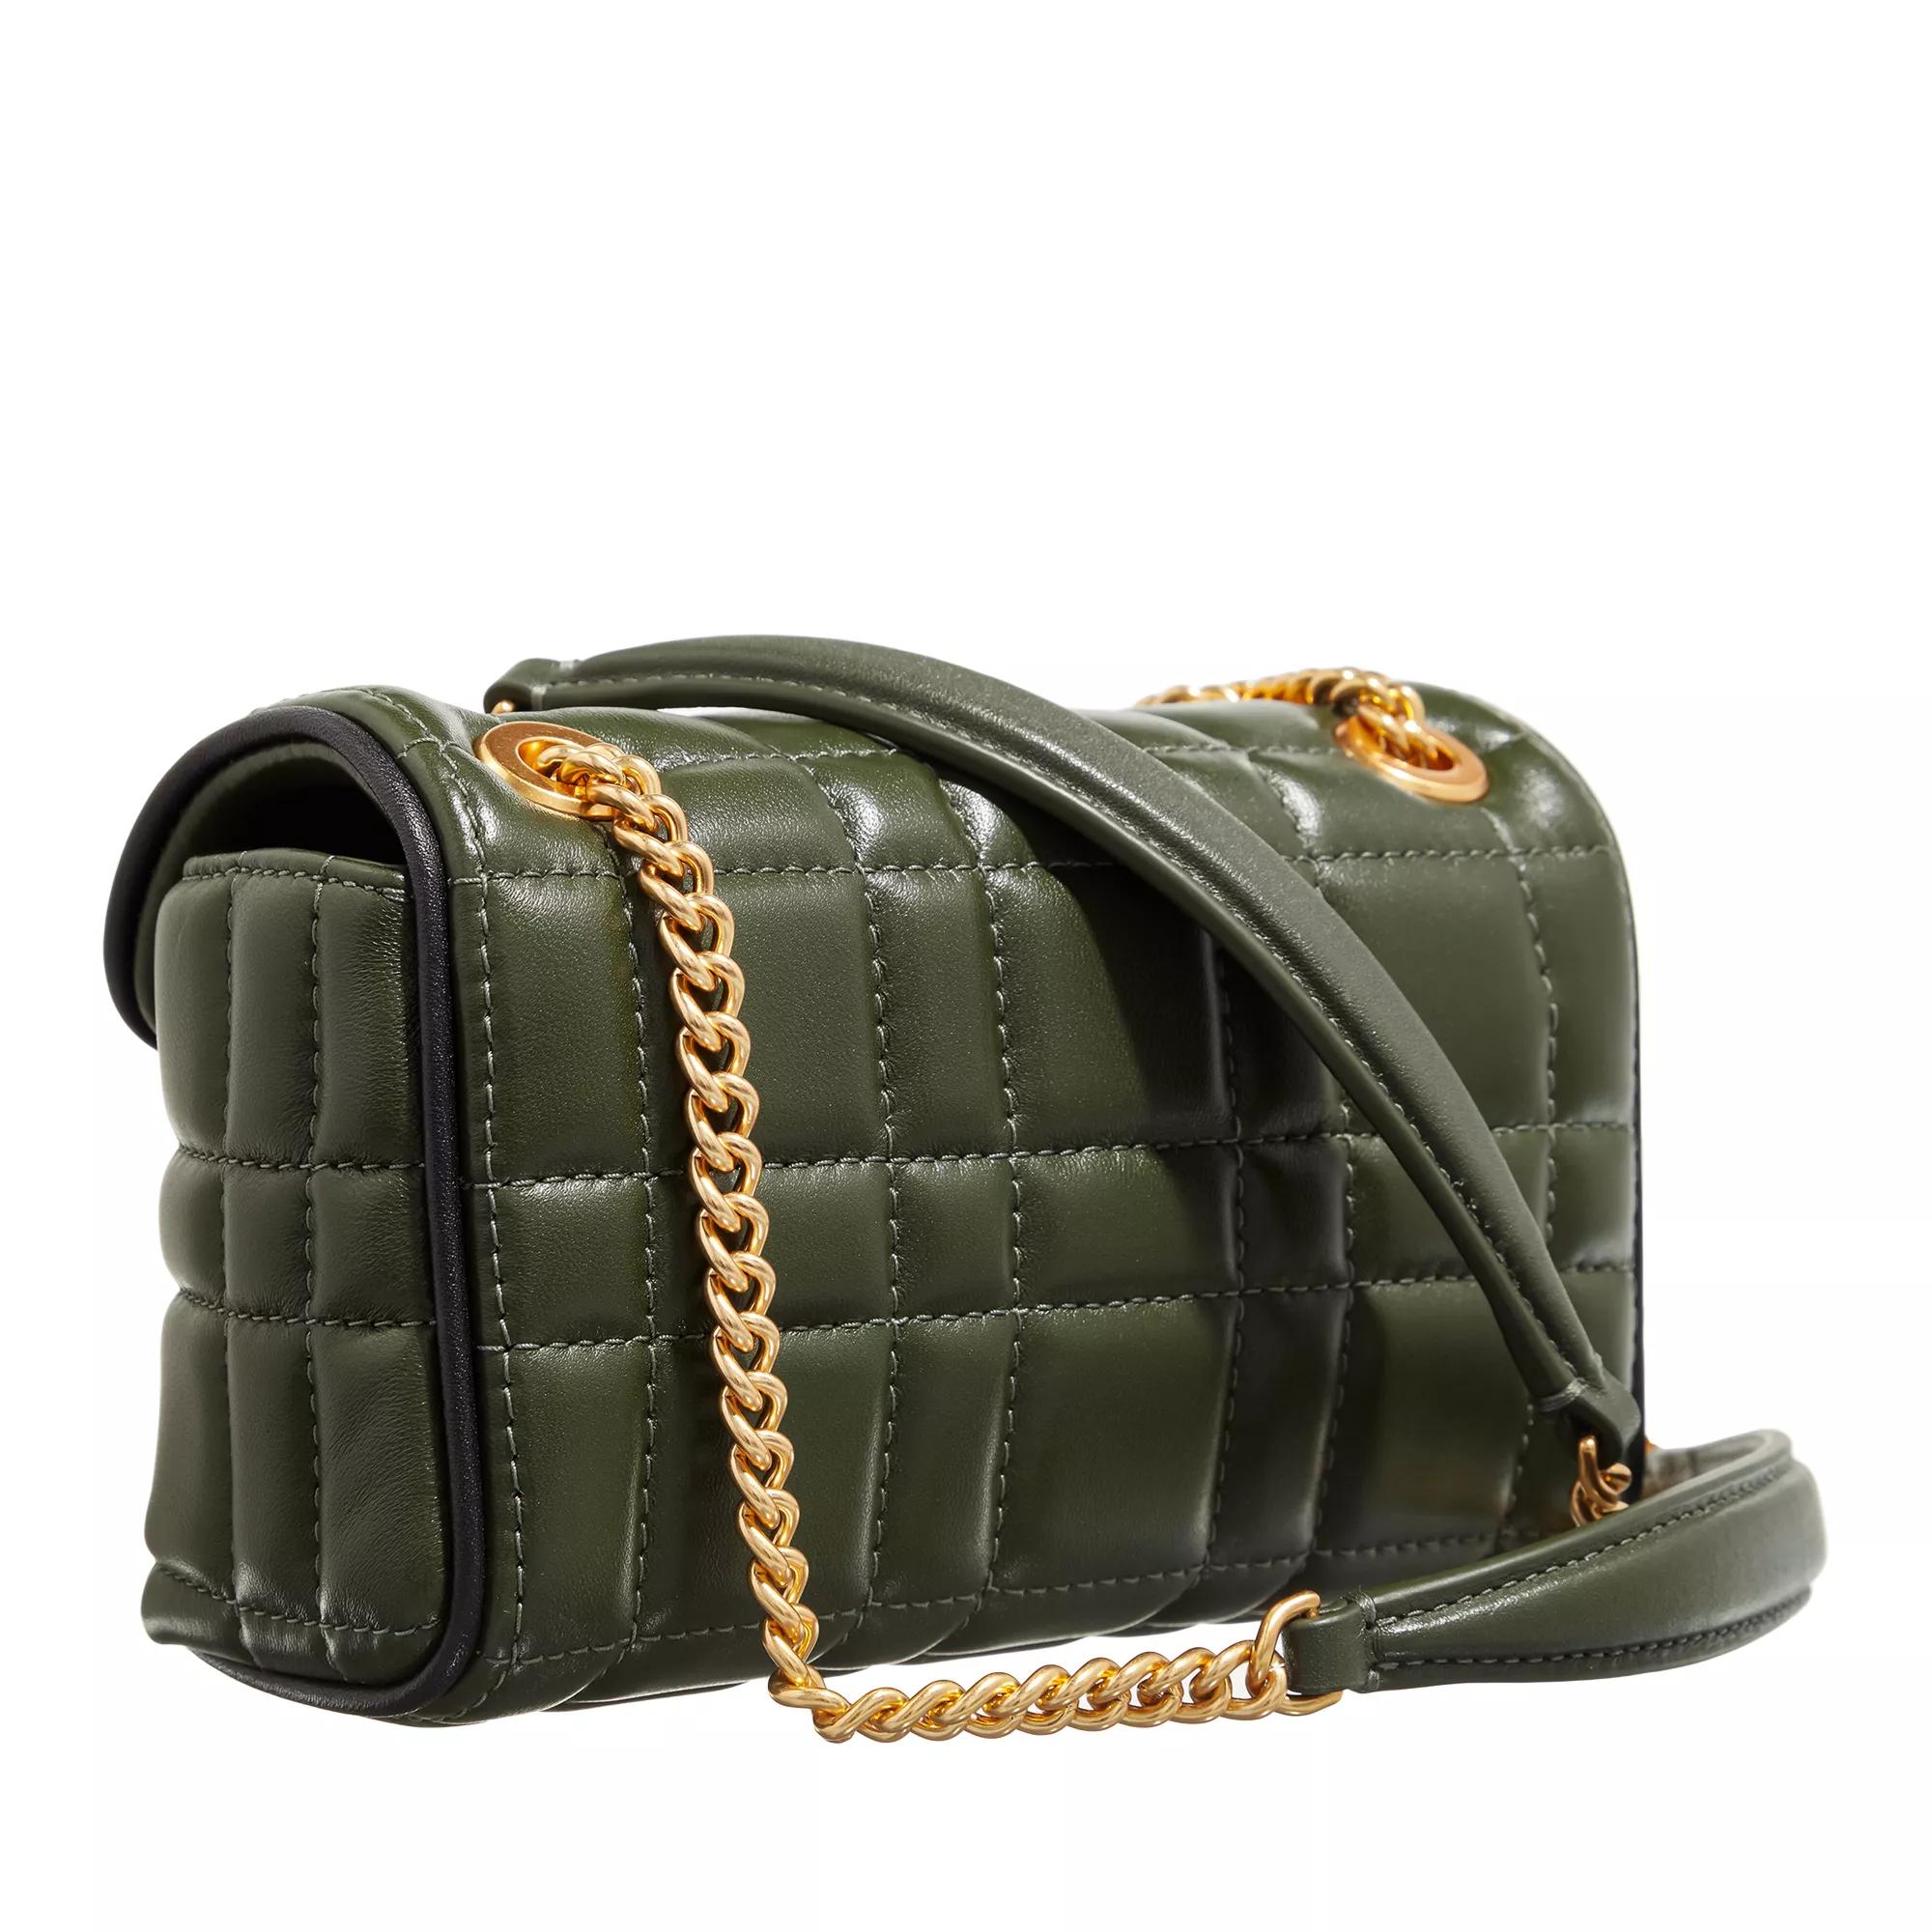 kate spade new york Crossbody bags Evelyn Quilted Leather in groen